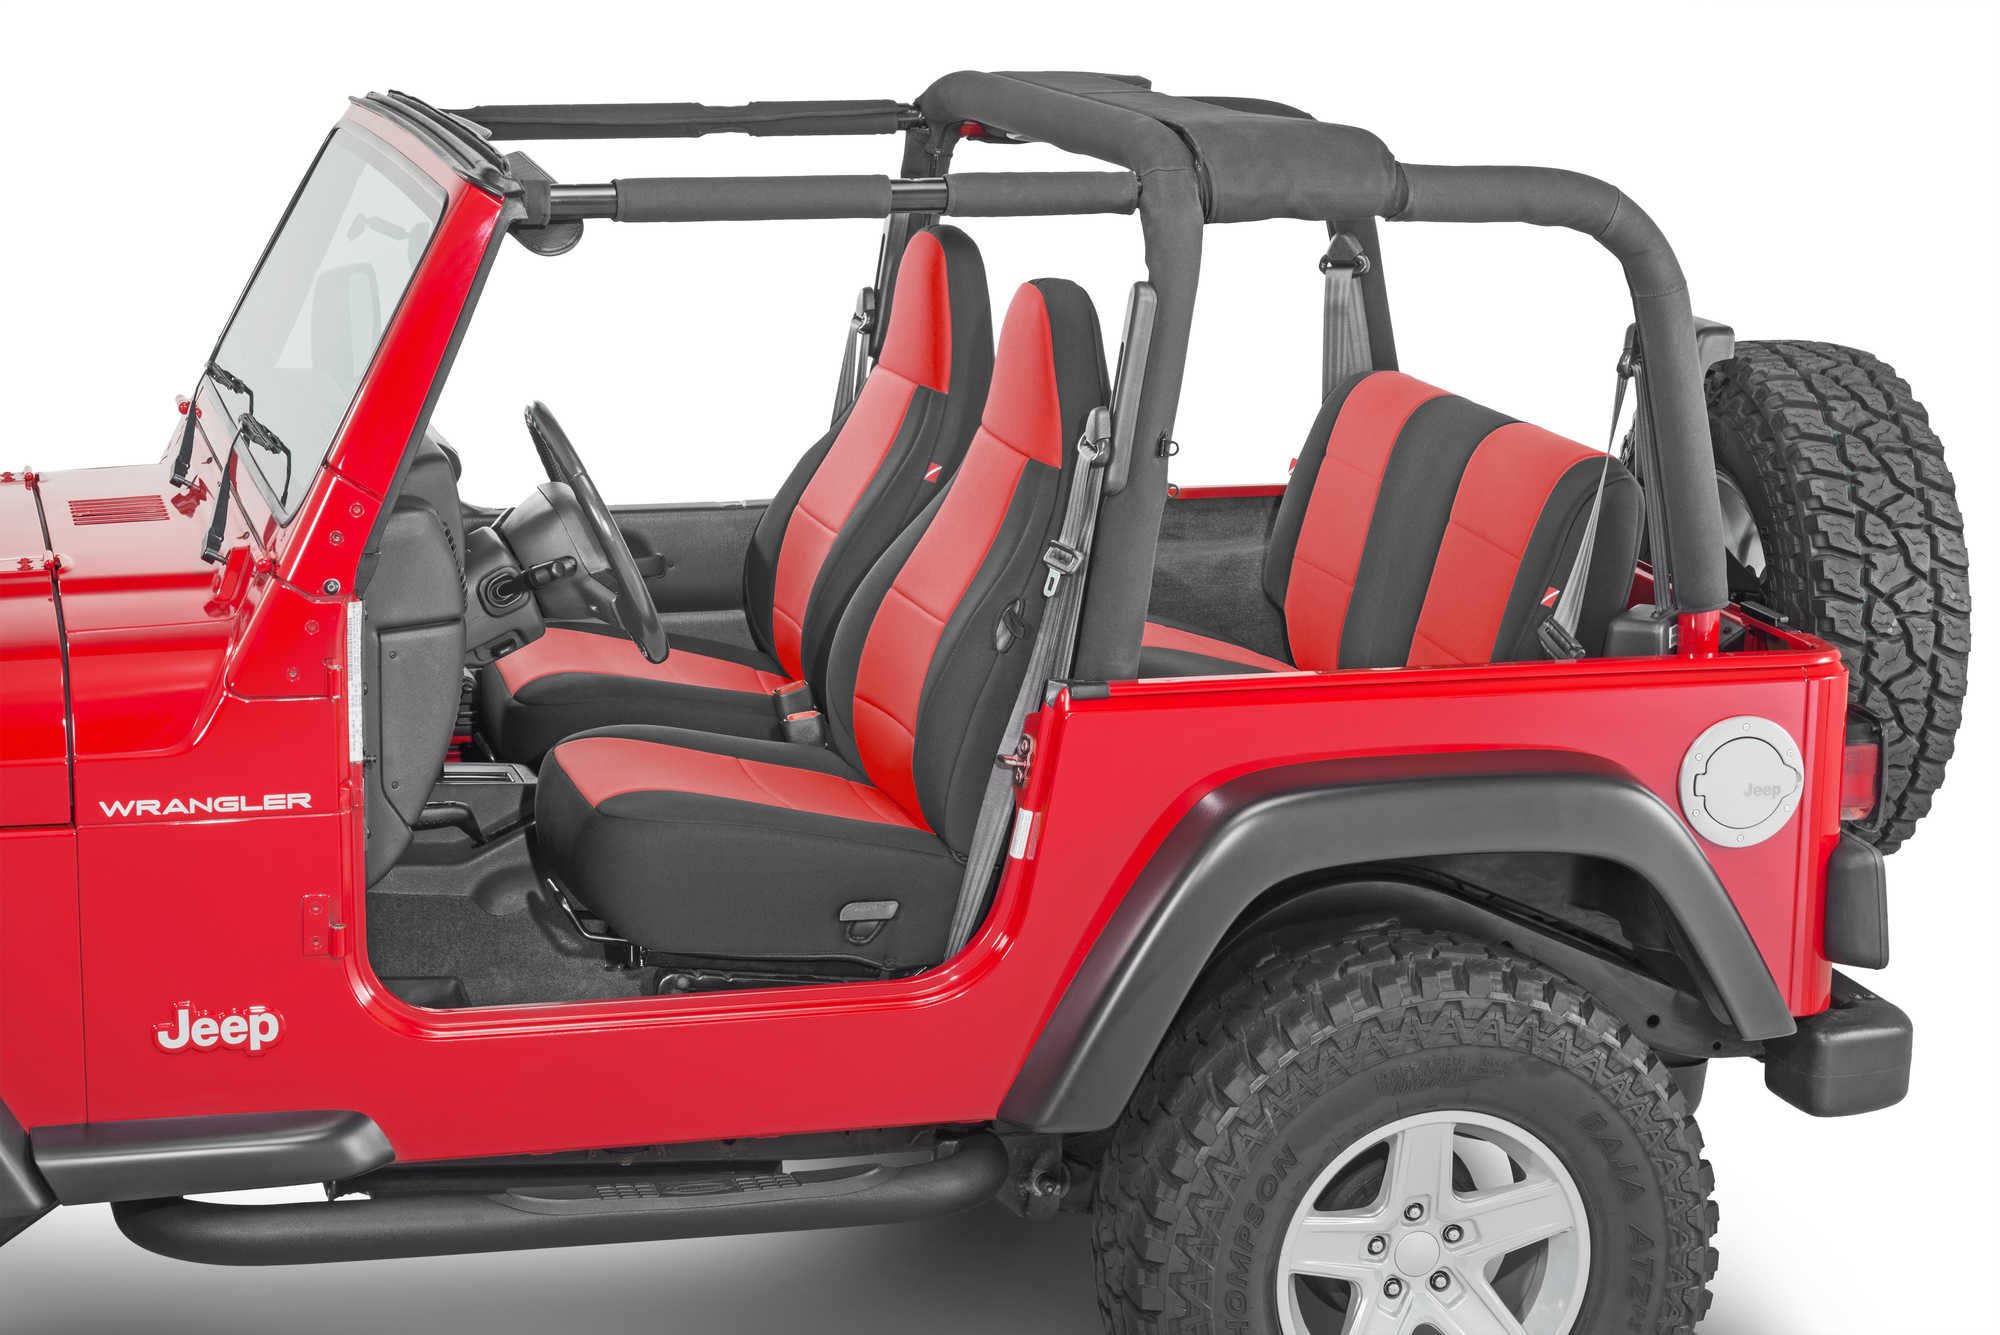 Diver Down Front and Rear Neoprene Seat Covers for 97-06 Jeep Wrangler TJ |  Quadratec